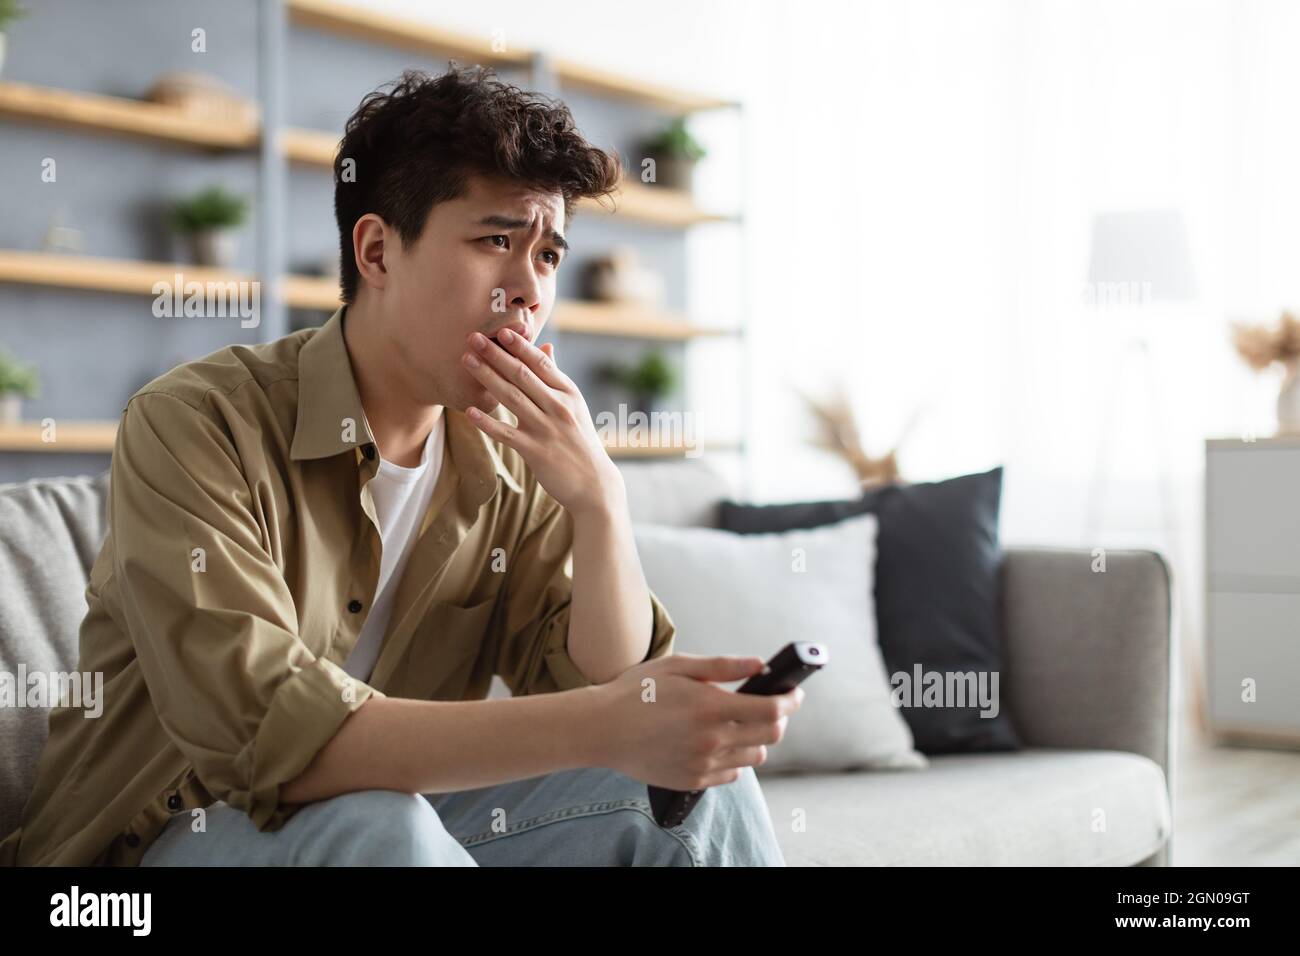 Bored asian man watching television, yawning sitting on couch Stock Photo